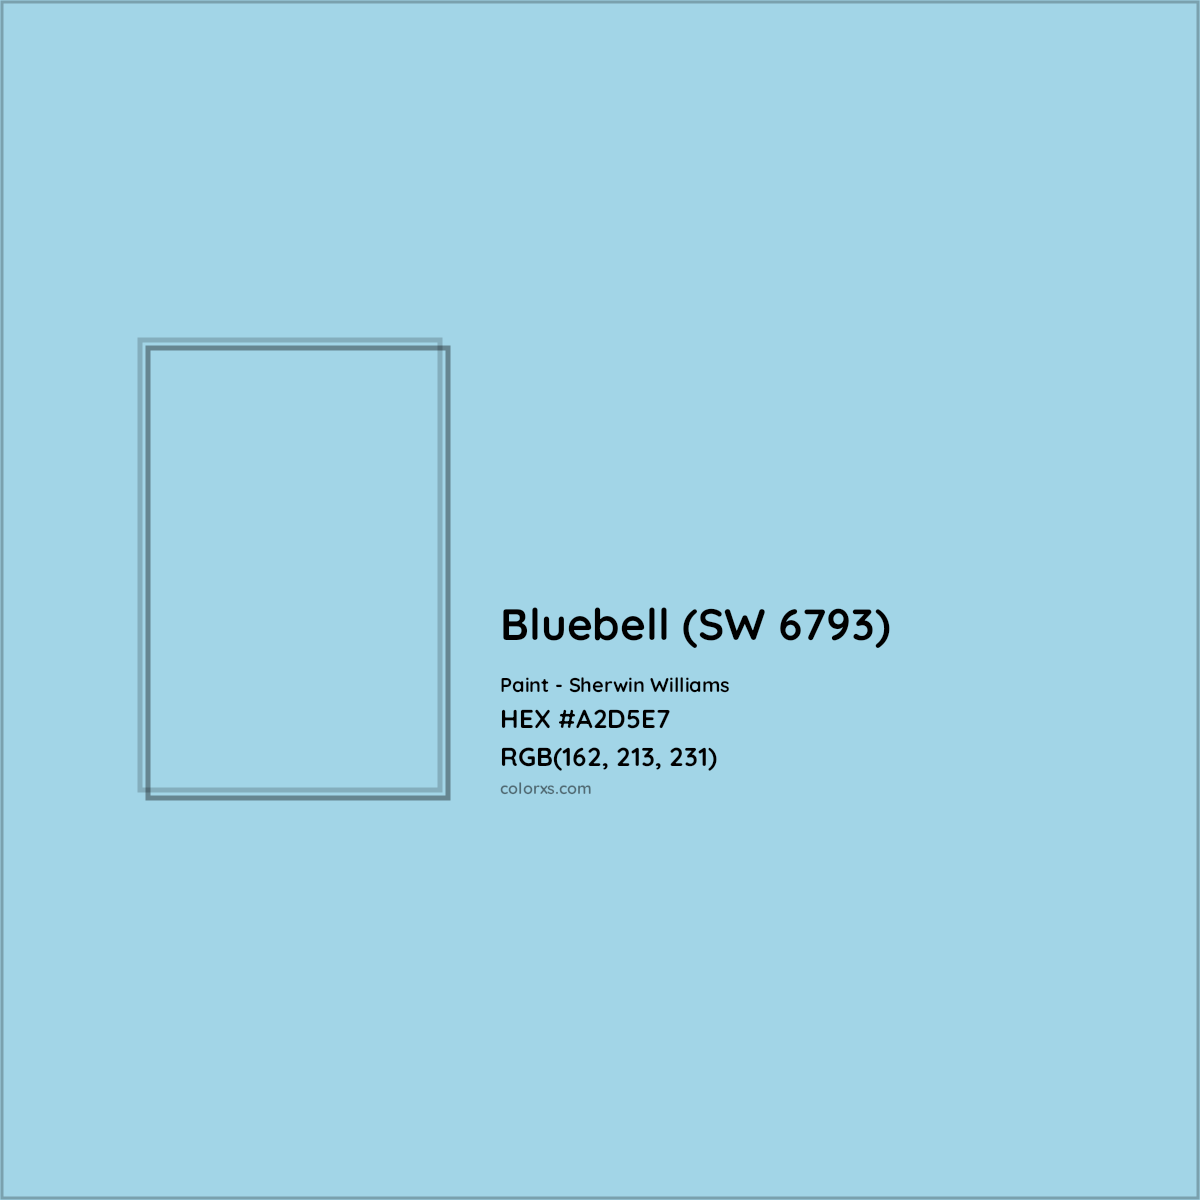 HEX #A2D5E7 Bluebell (SW 6793) Paint Sherwin Williams - Color Code